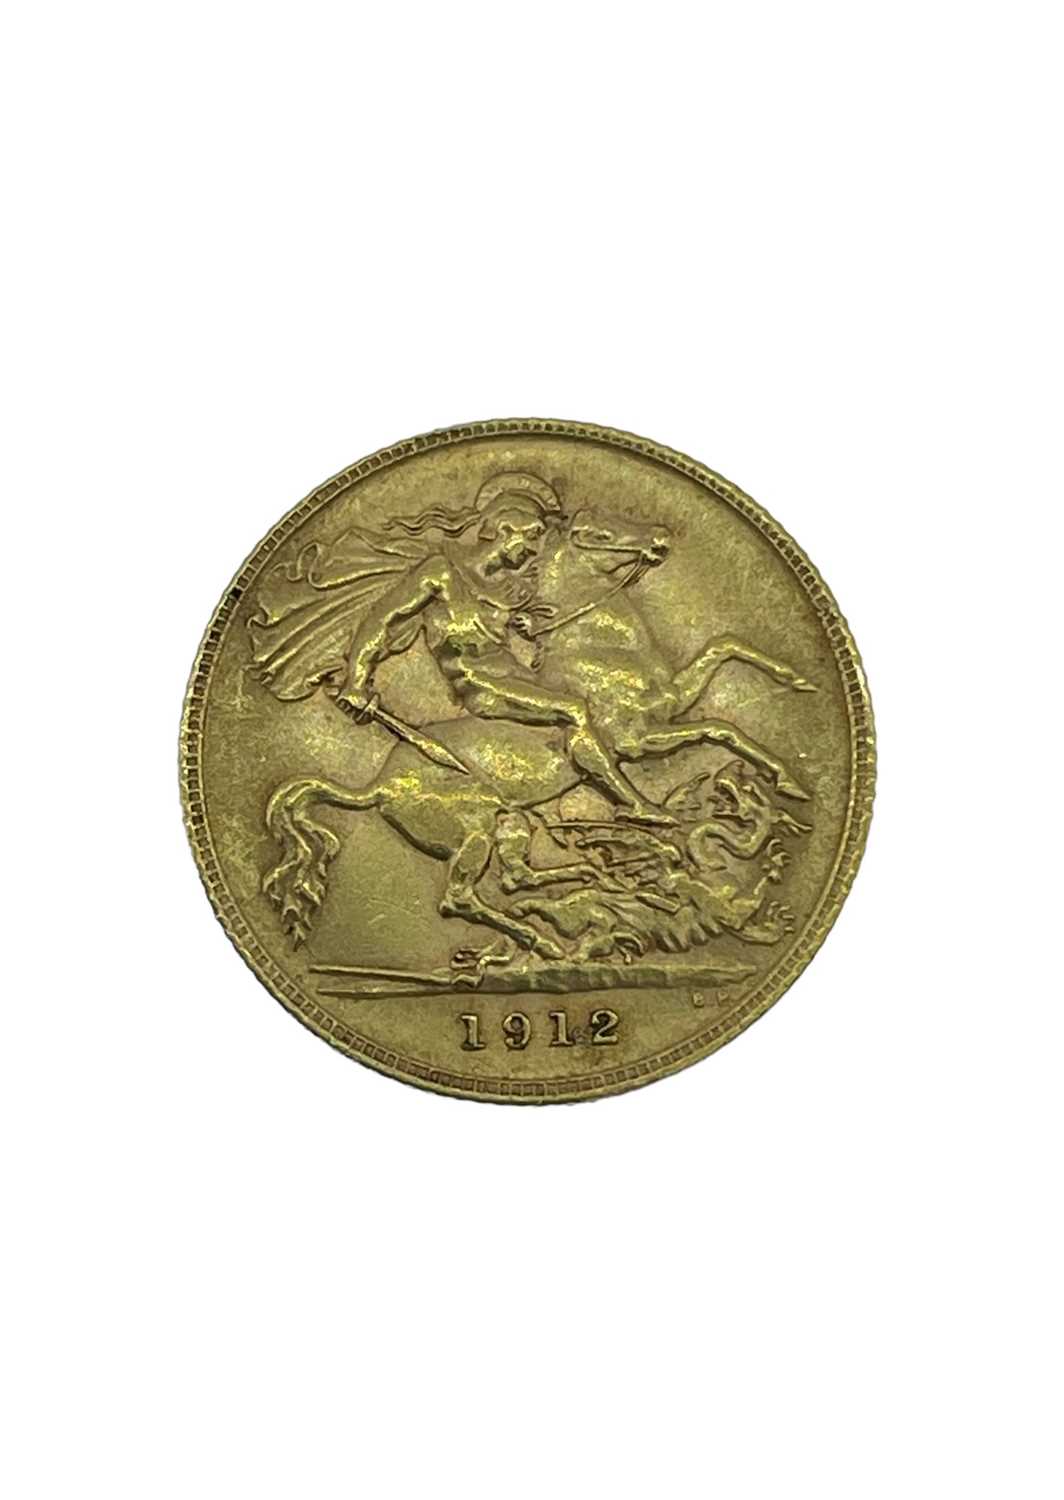 GEORGE V GOLD HALF SOVEREIGN, 1912, 4.0gms Provenance: private collection Carmarthenshire, consigned